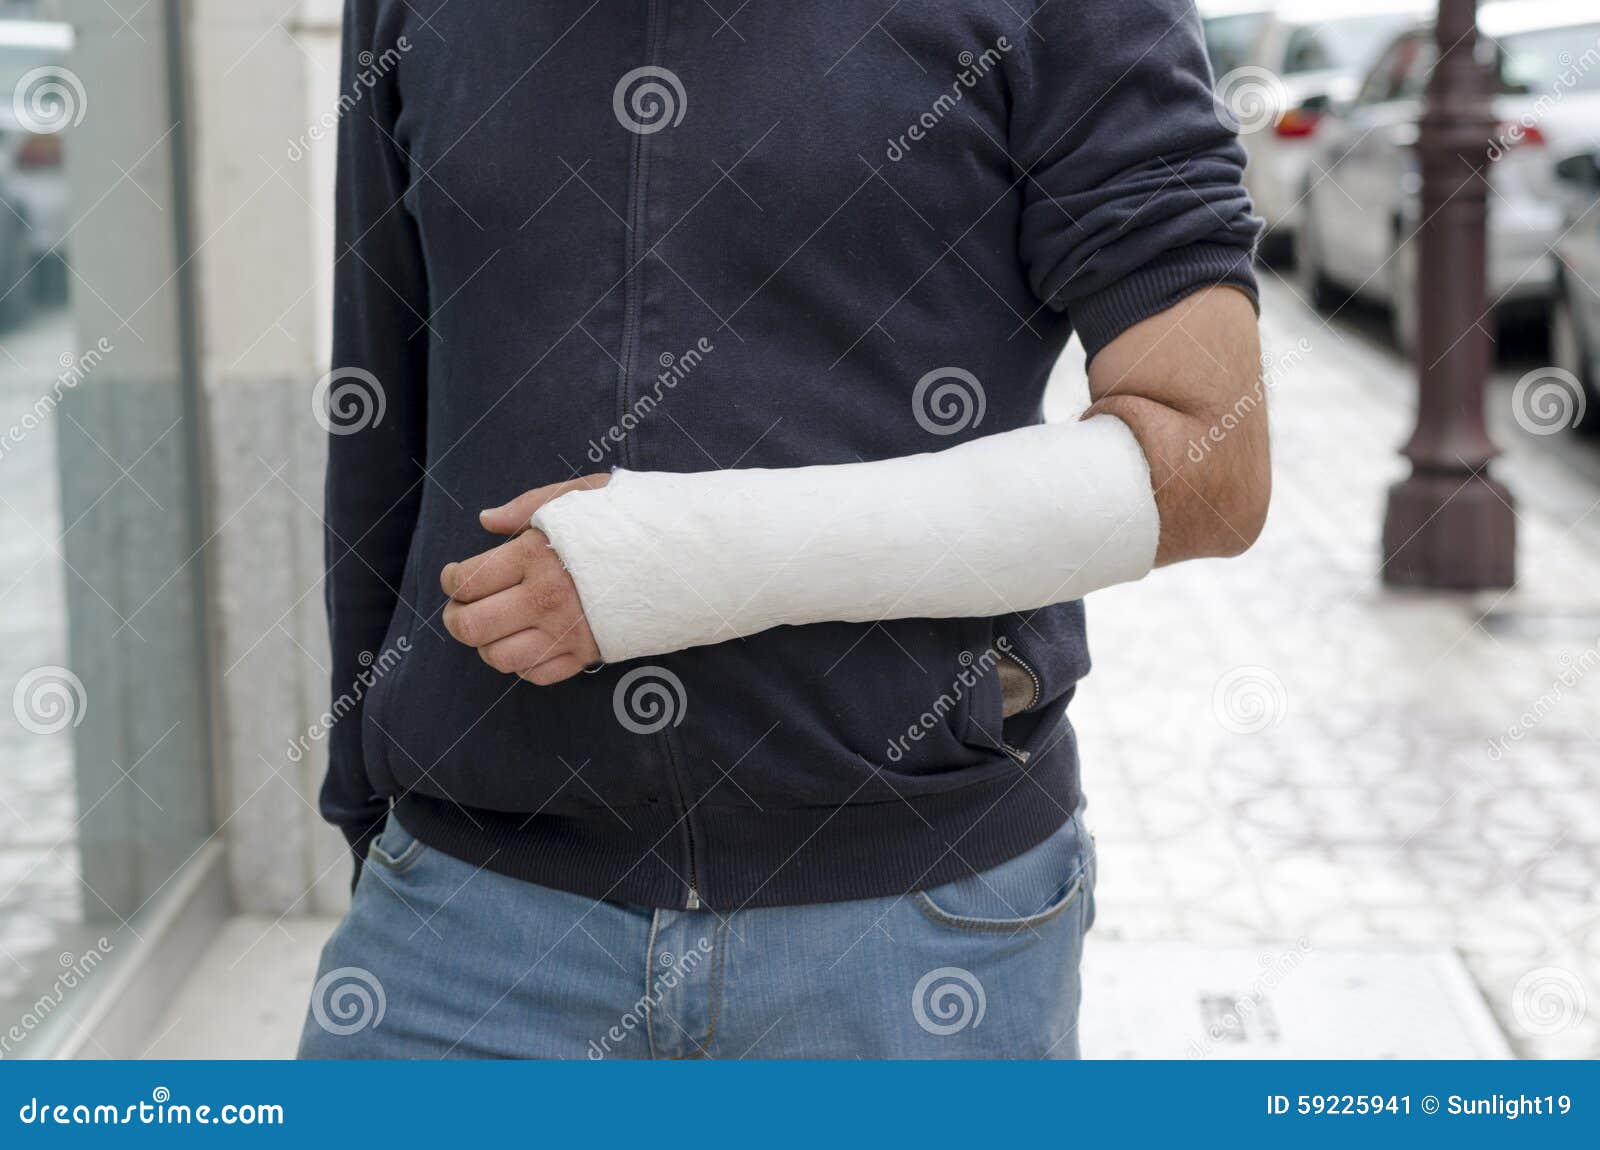 man with his broken arm. arm in cast.